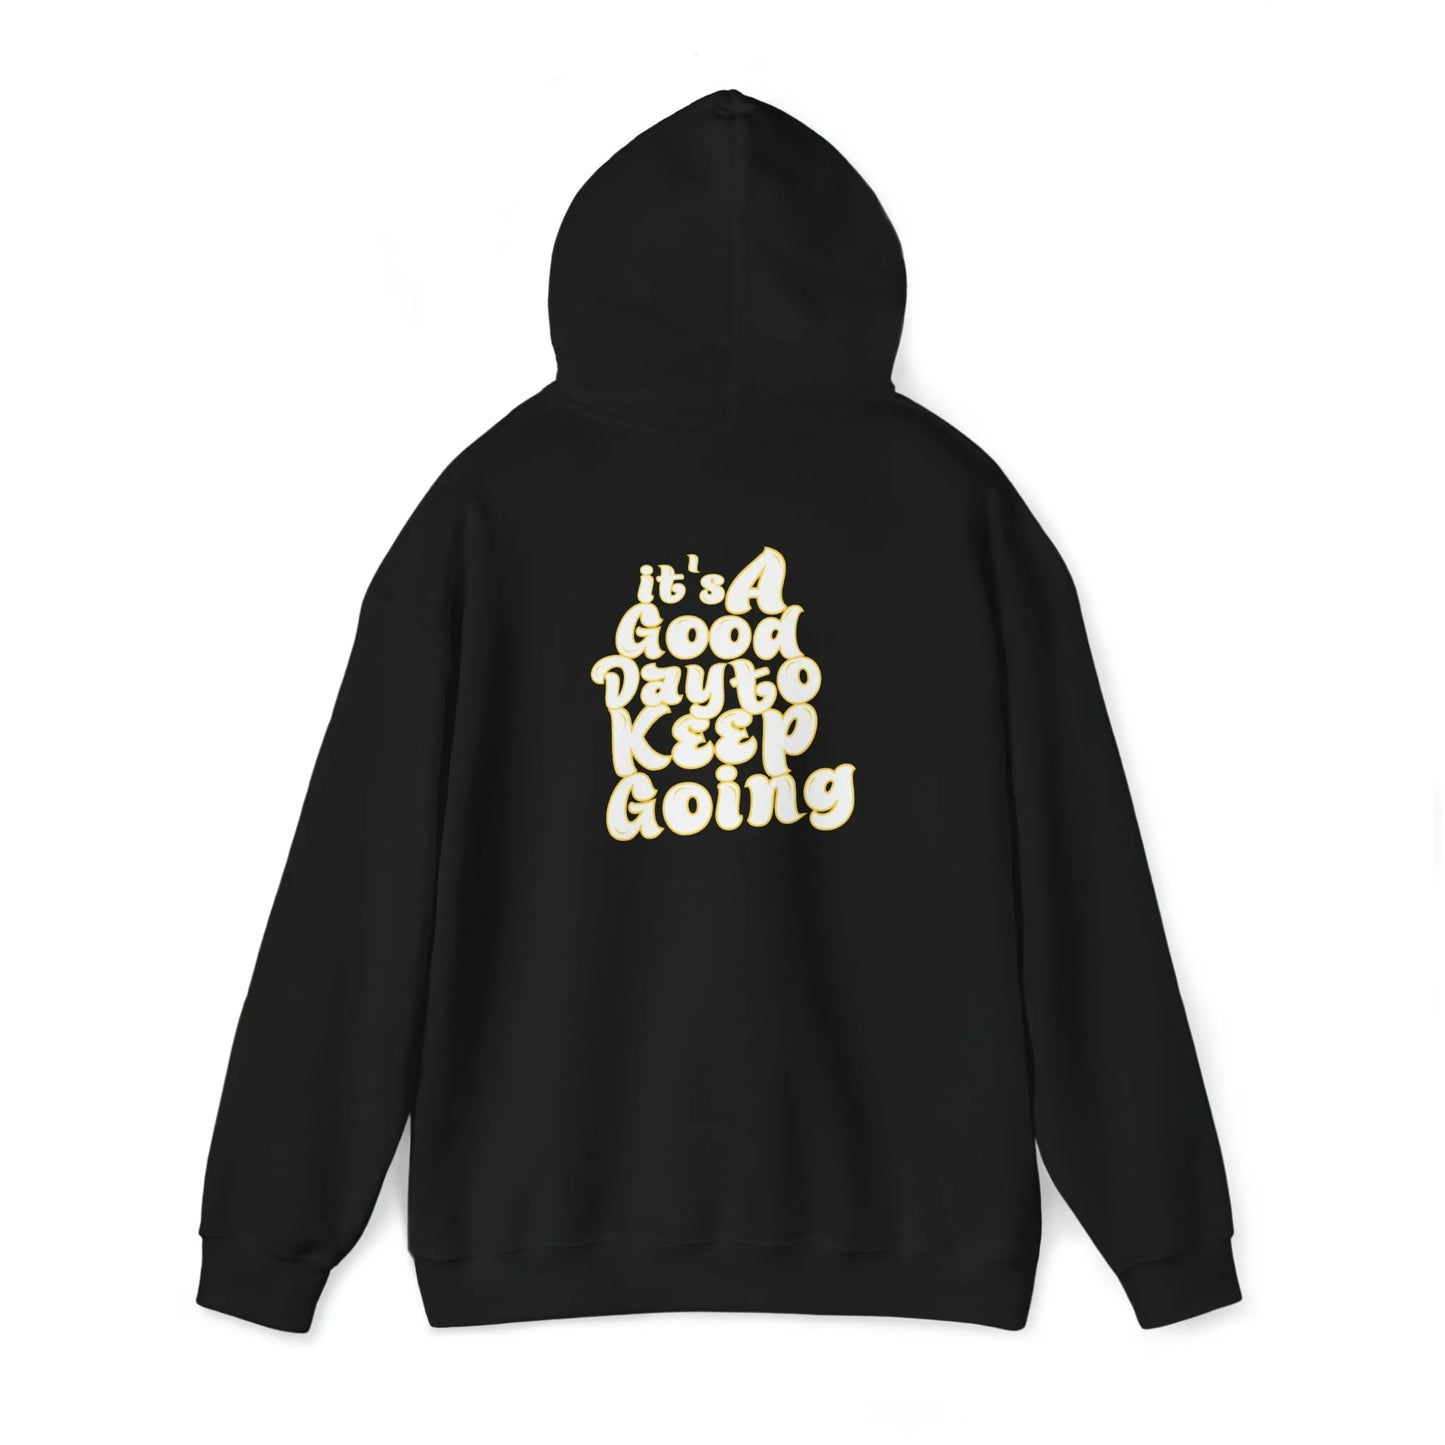 It's A Good Day To Keep Going Hoodie Yellow Black Back Hood Up